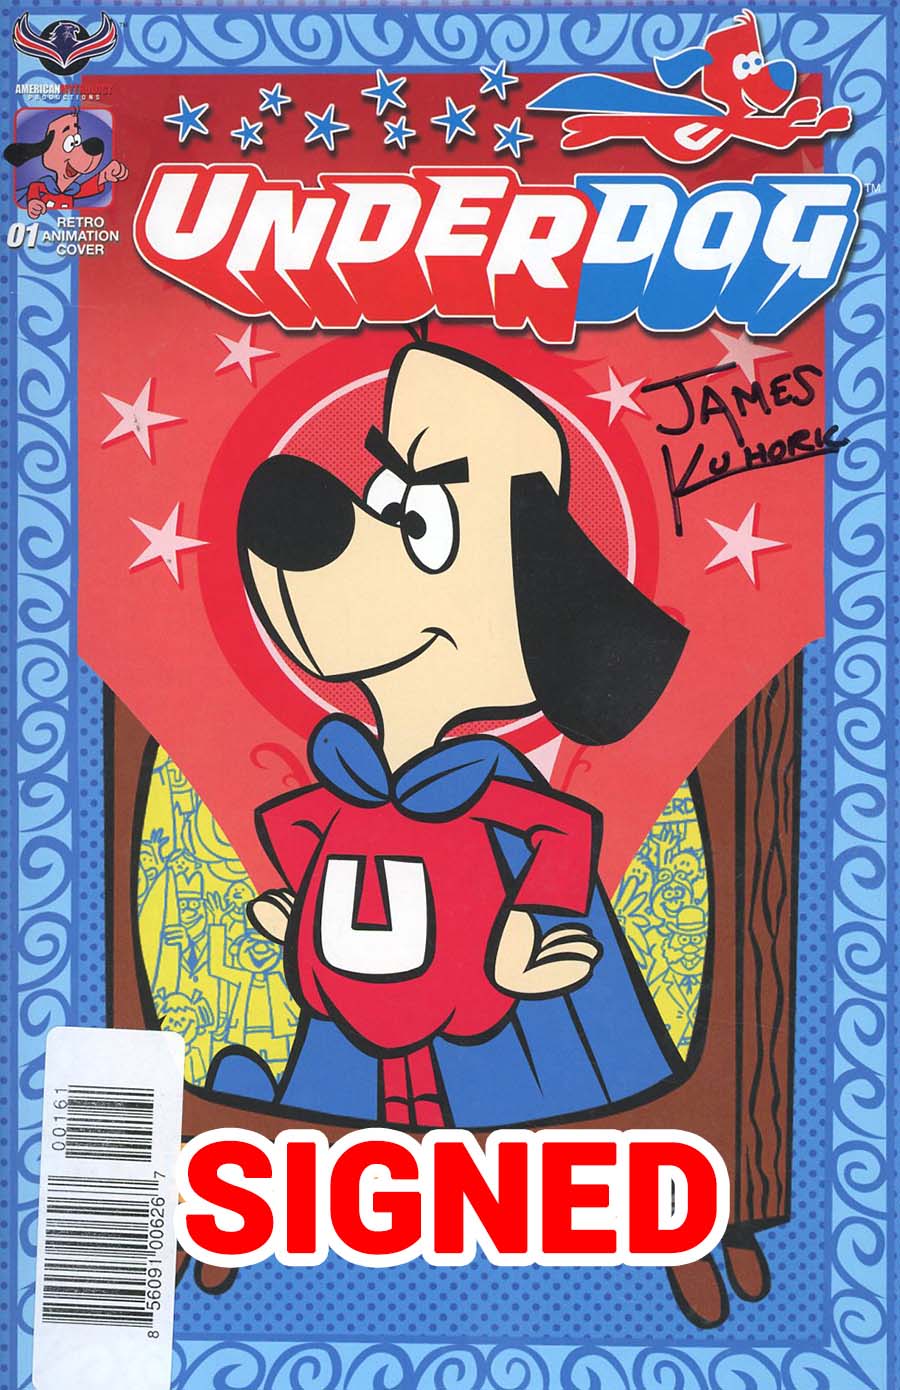 Underdog (American Mythology) #1 Cover G Incentive Patrick Owsley Retro Animation Variant Cover Signed By James Kuhoric